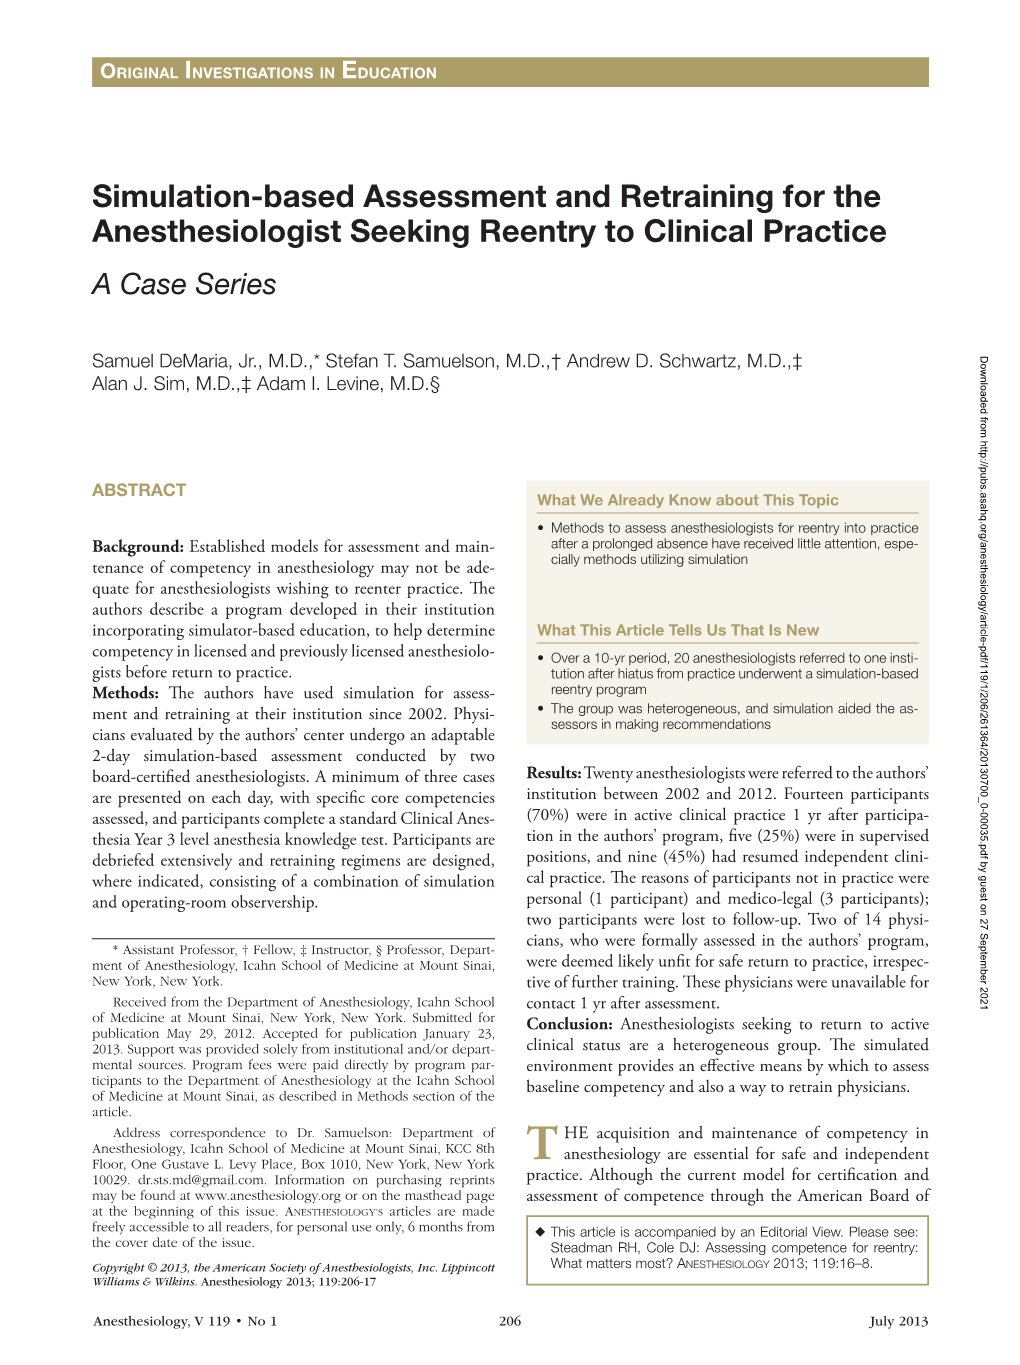 Simulation-Based Assessment and Retraining for the Anesthesiologist Seeking Reentry to Clinical Practice a Case Series